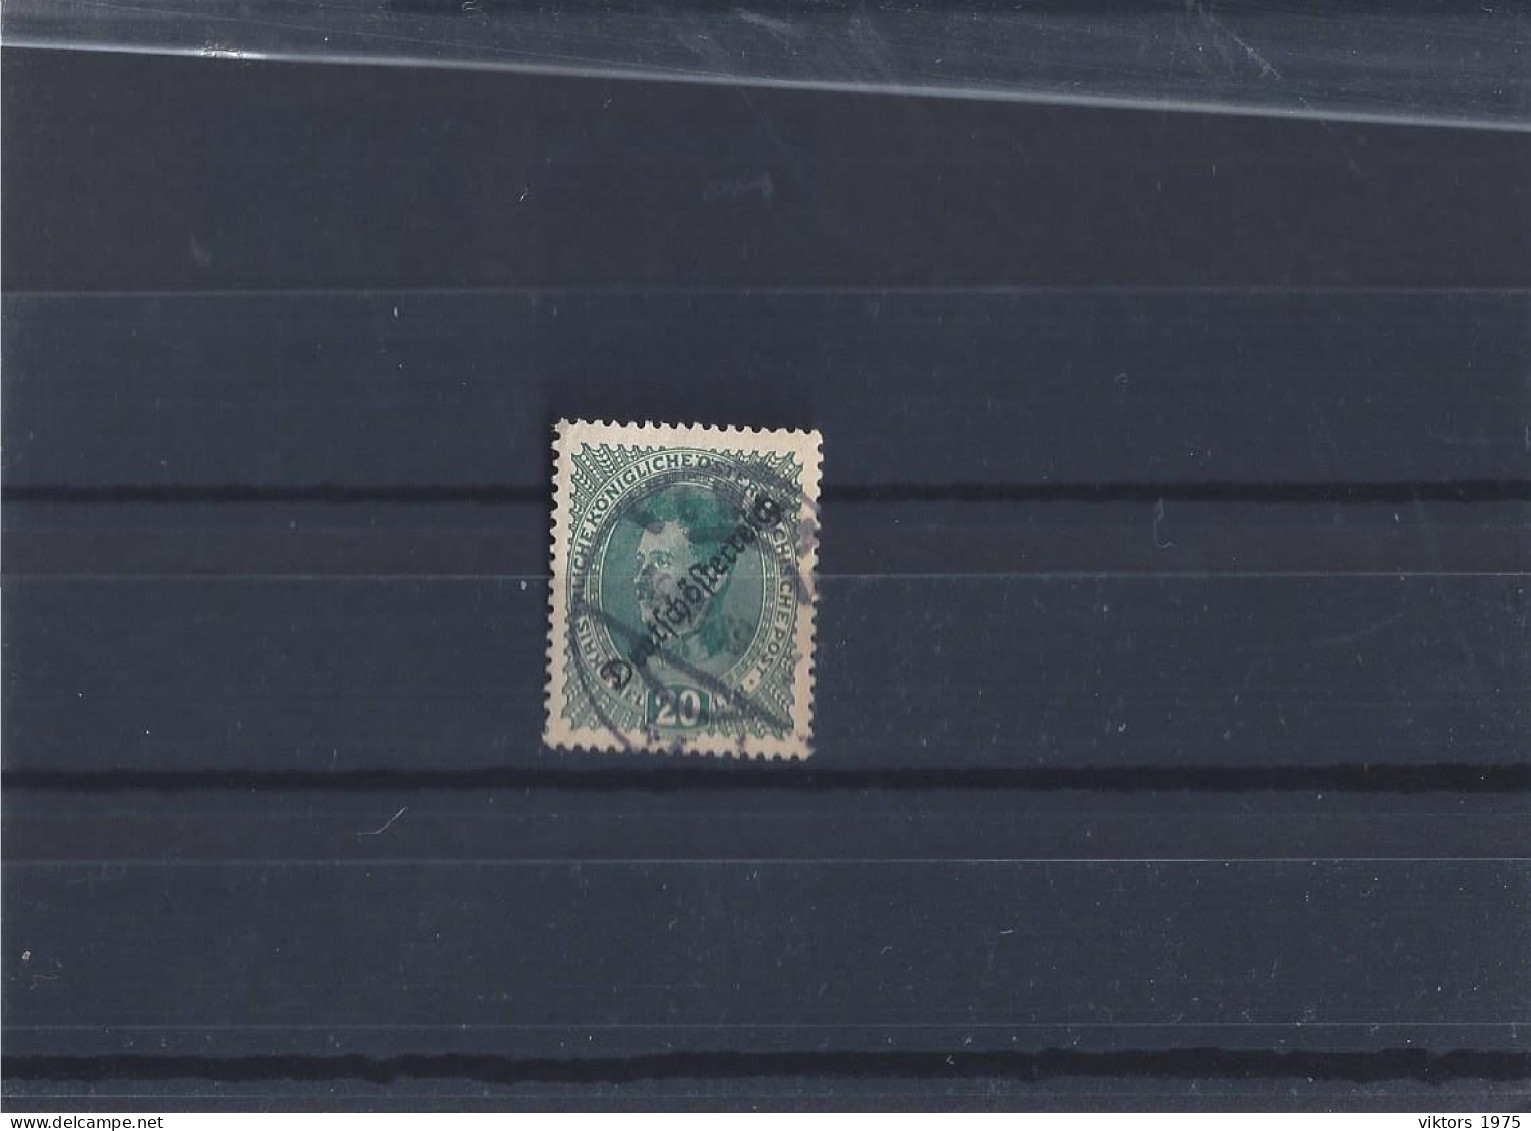 Used Stamp Nr.234 In MICHEL Catalog - Used Stamps